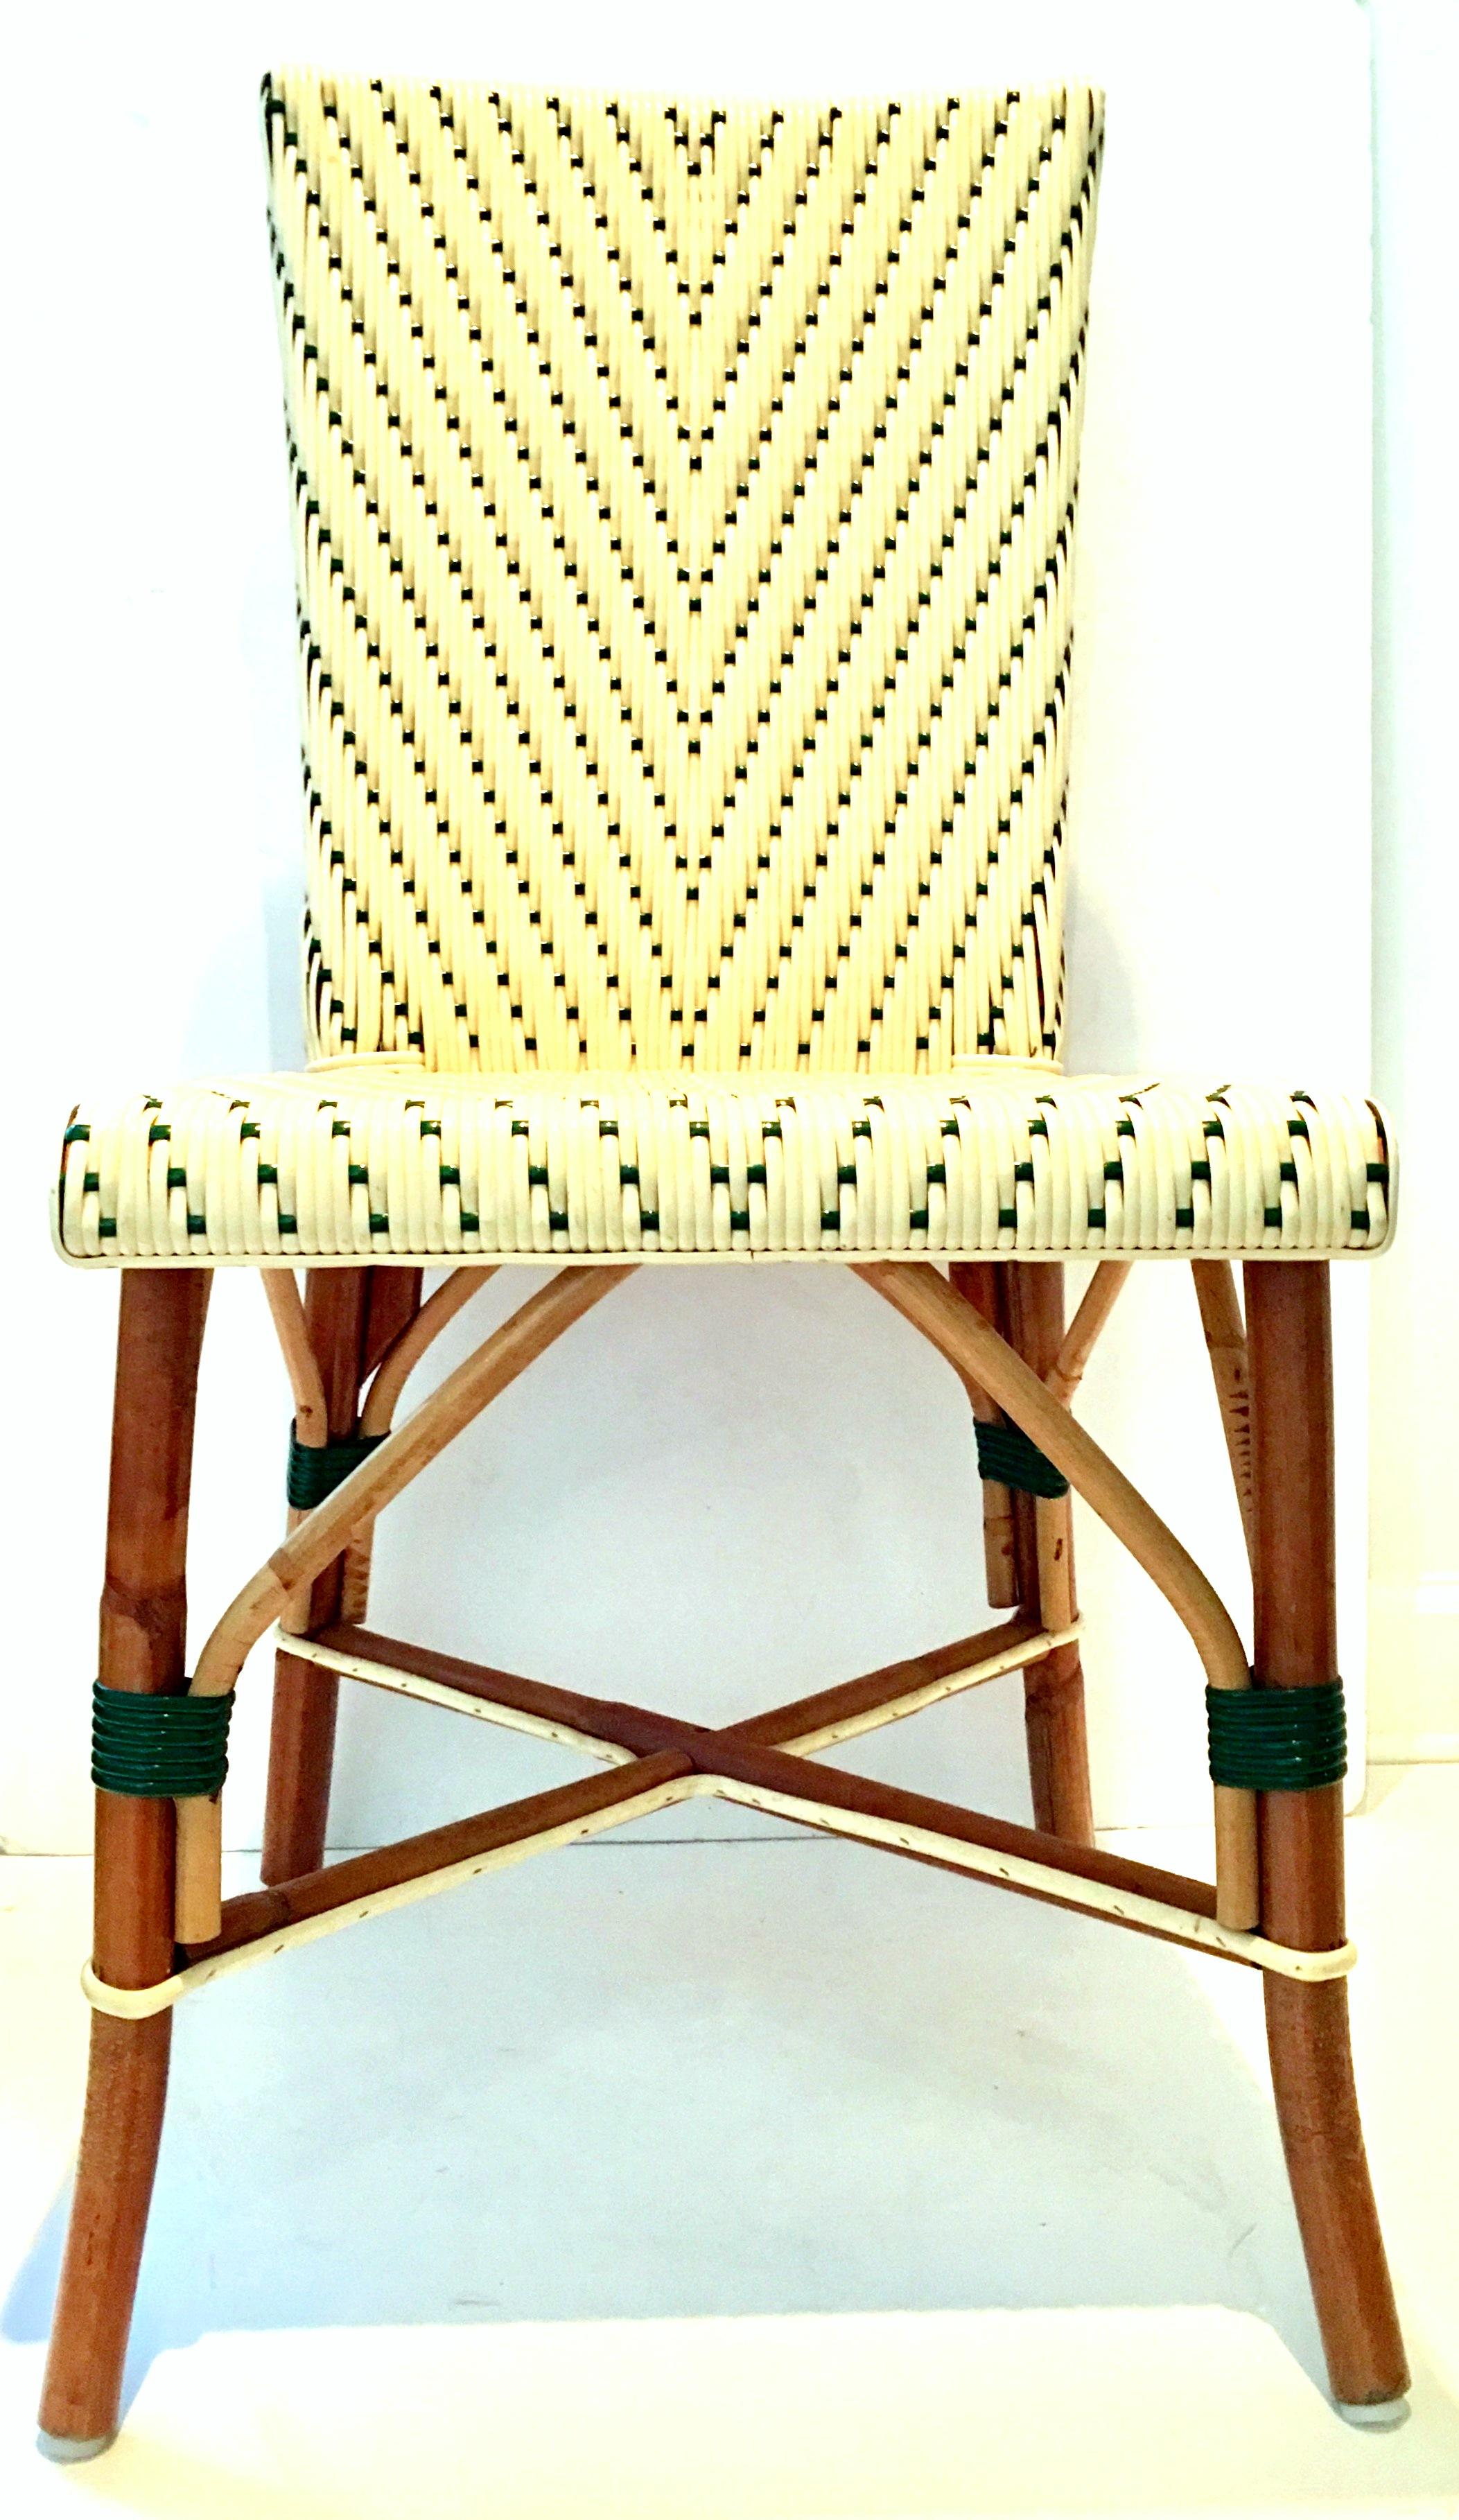 Italian made vintage woven vinyl and rattan Bistro chair. Hunter green and cream colored plastic hand woven with a rattan base. Chair is marked, Made in Italy on the underside. Seat height, 18